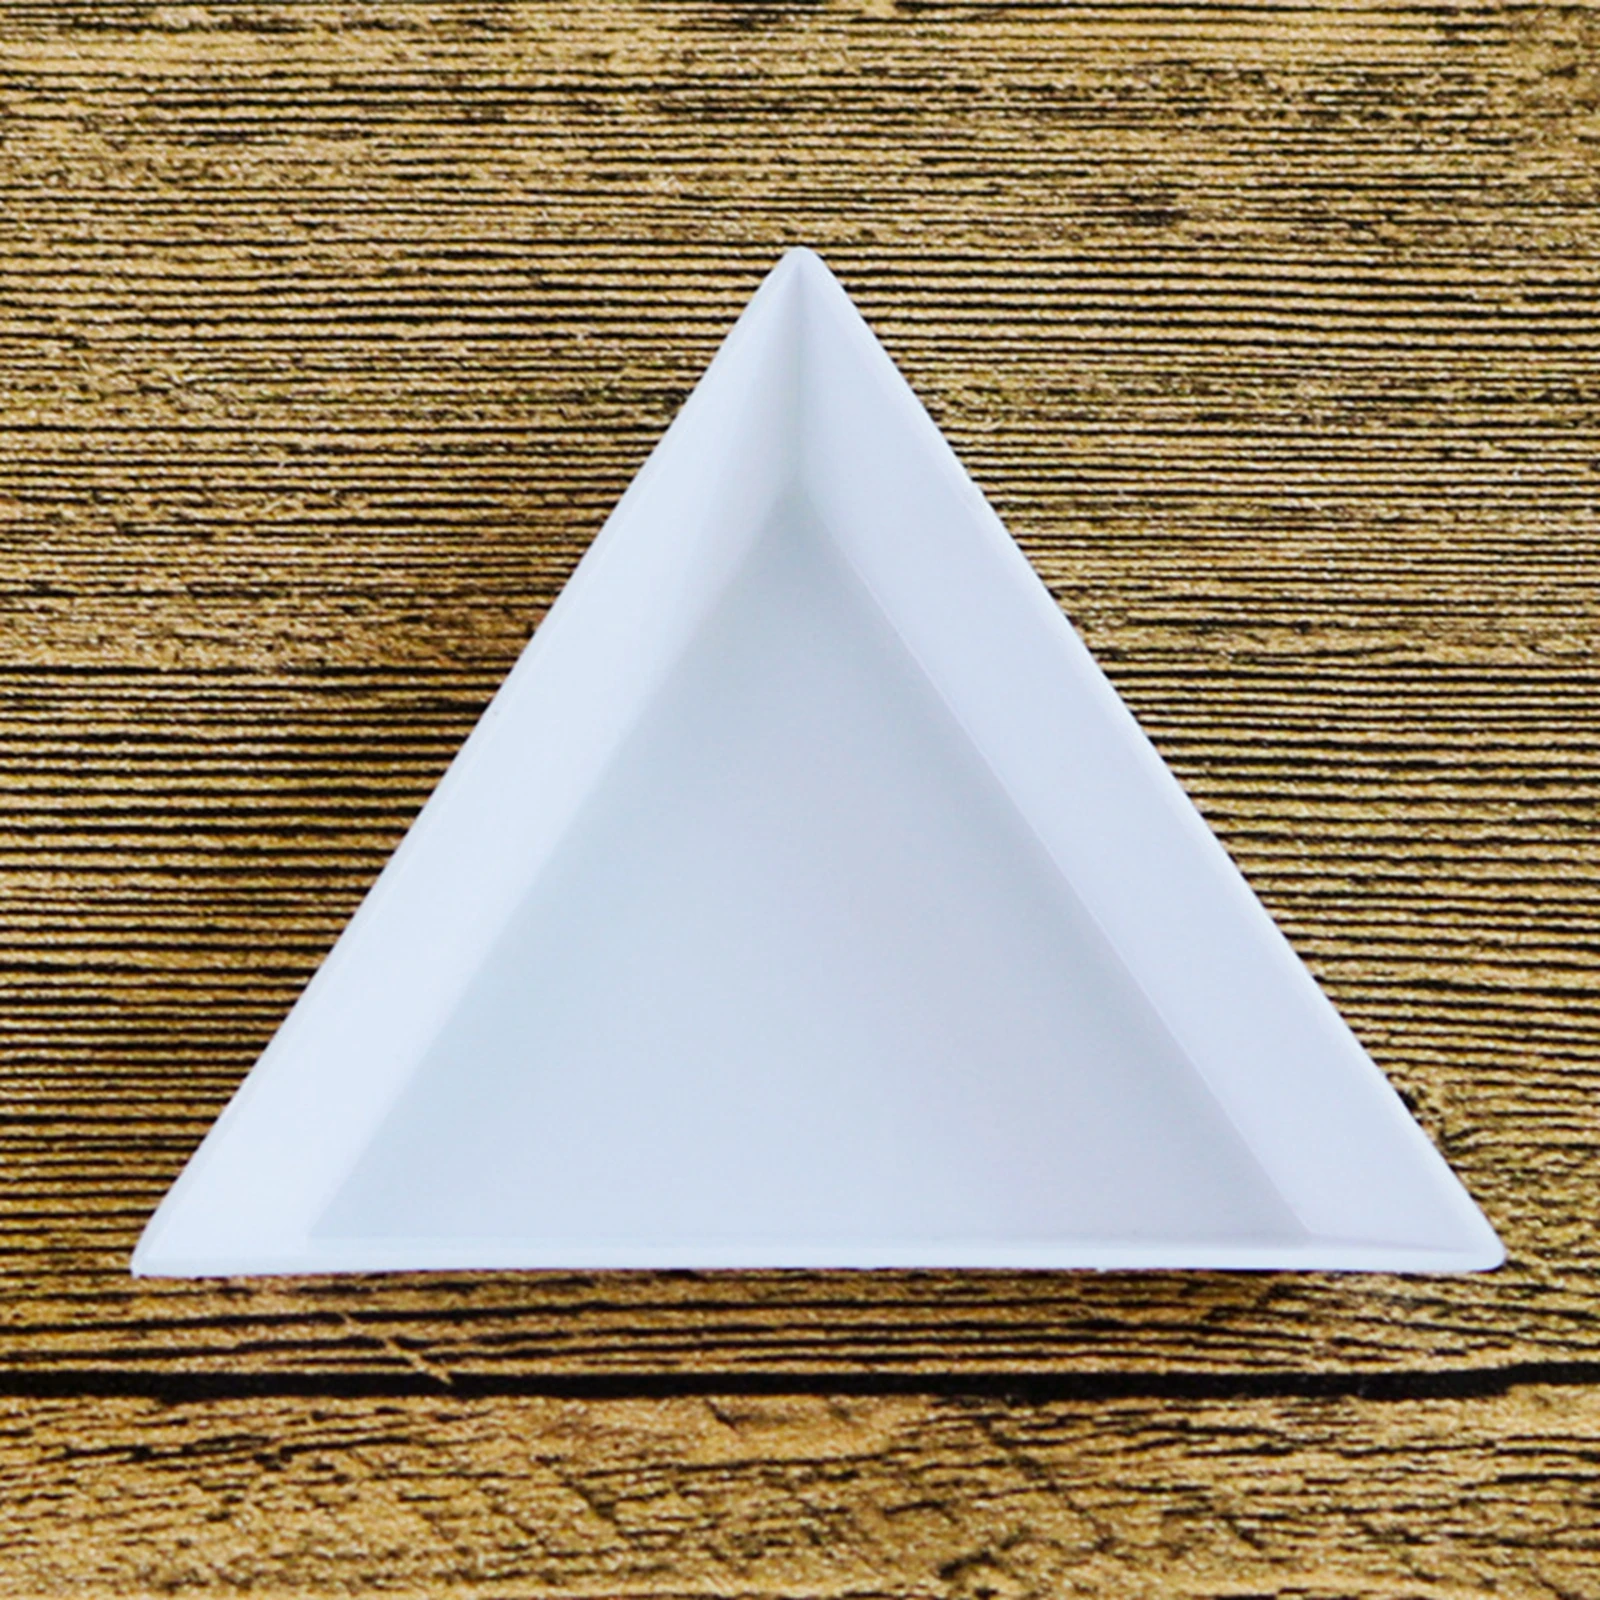 20 White Plastic Triangular Beads Sorting Trays 70mm Storage Container For Craft